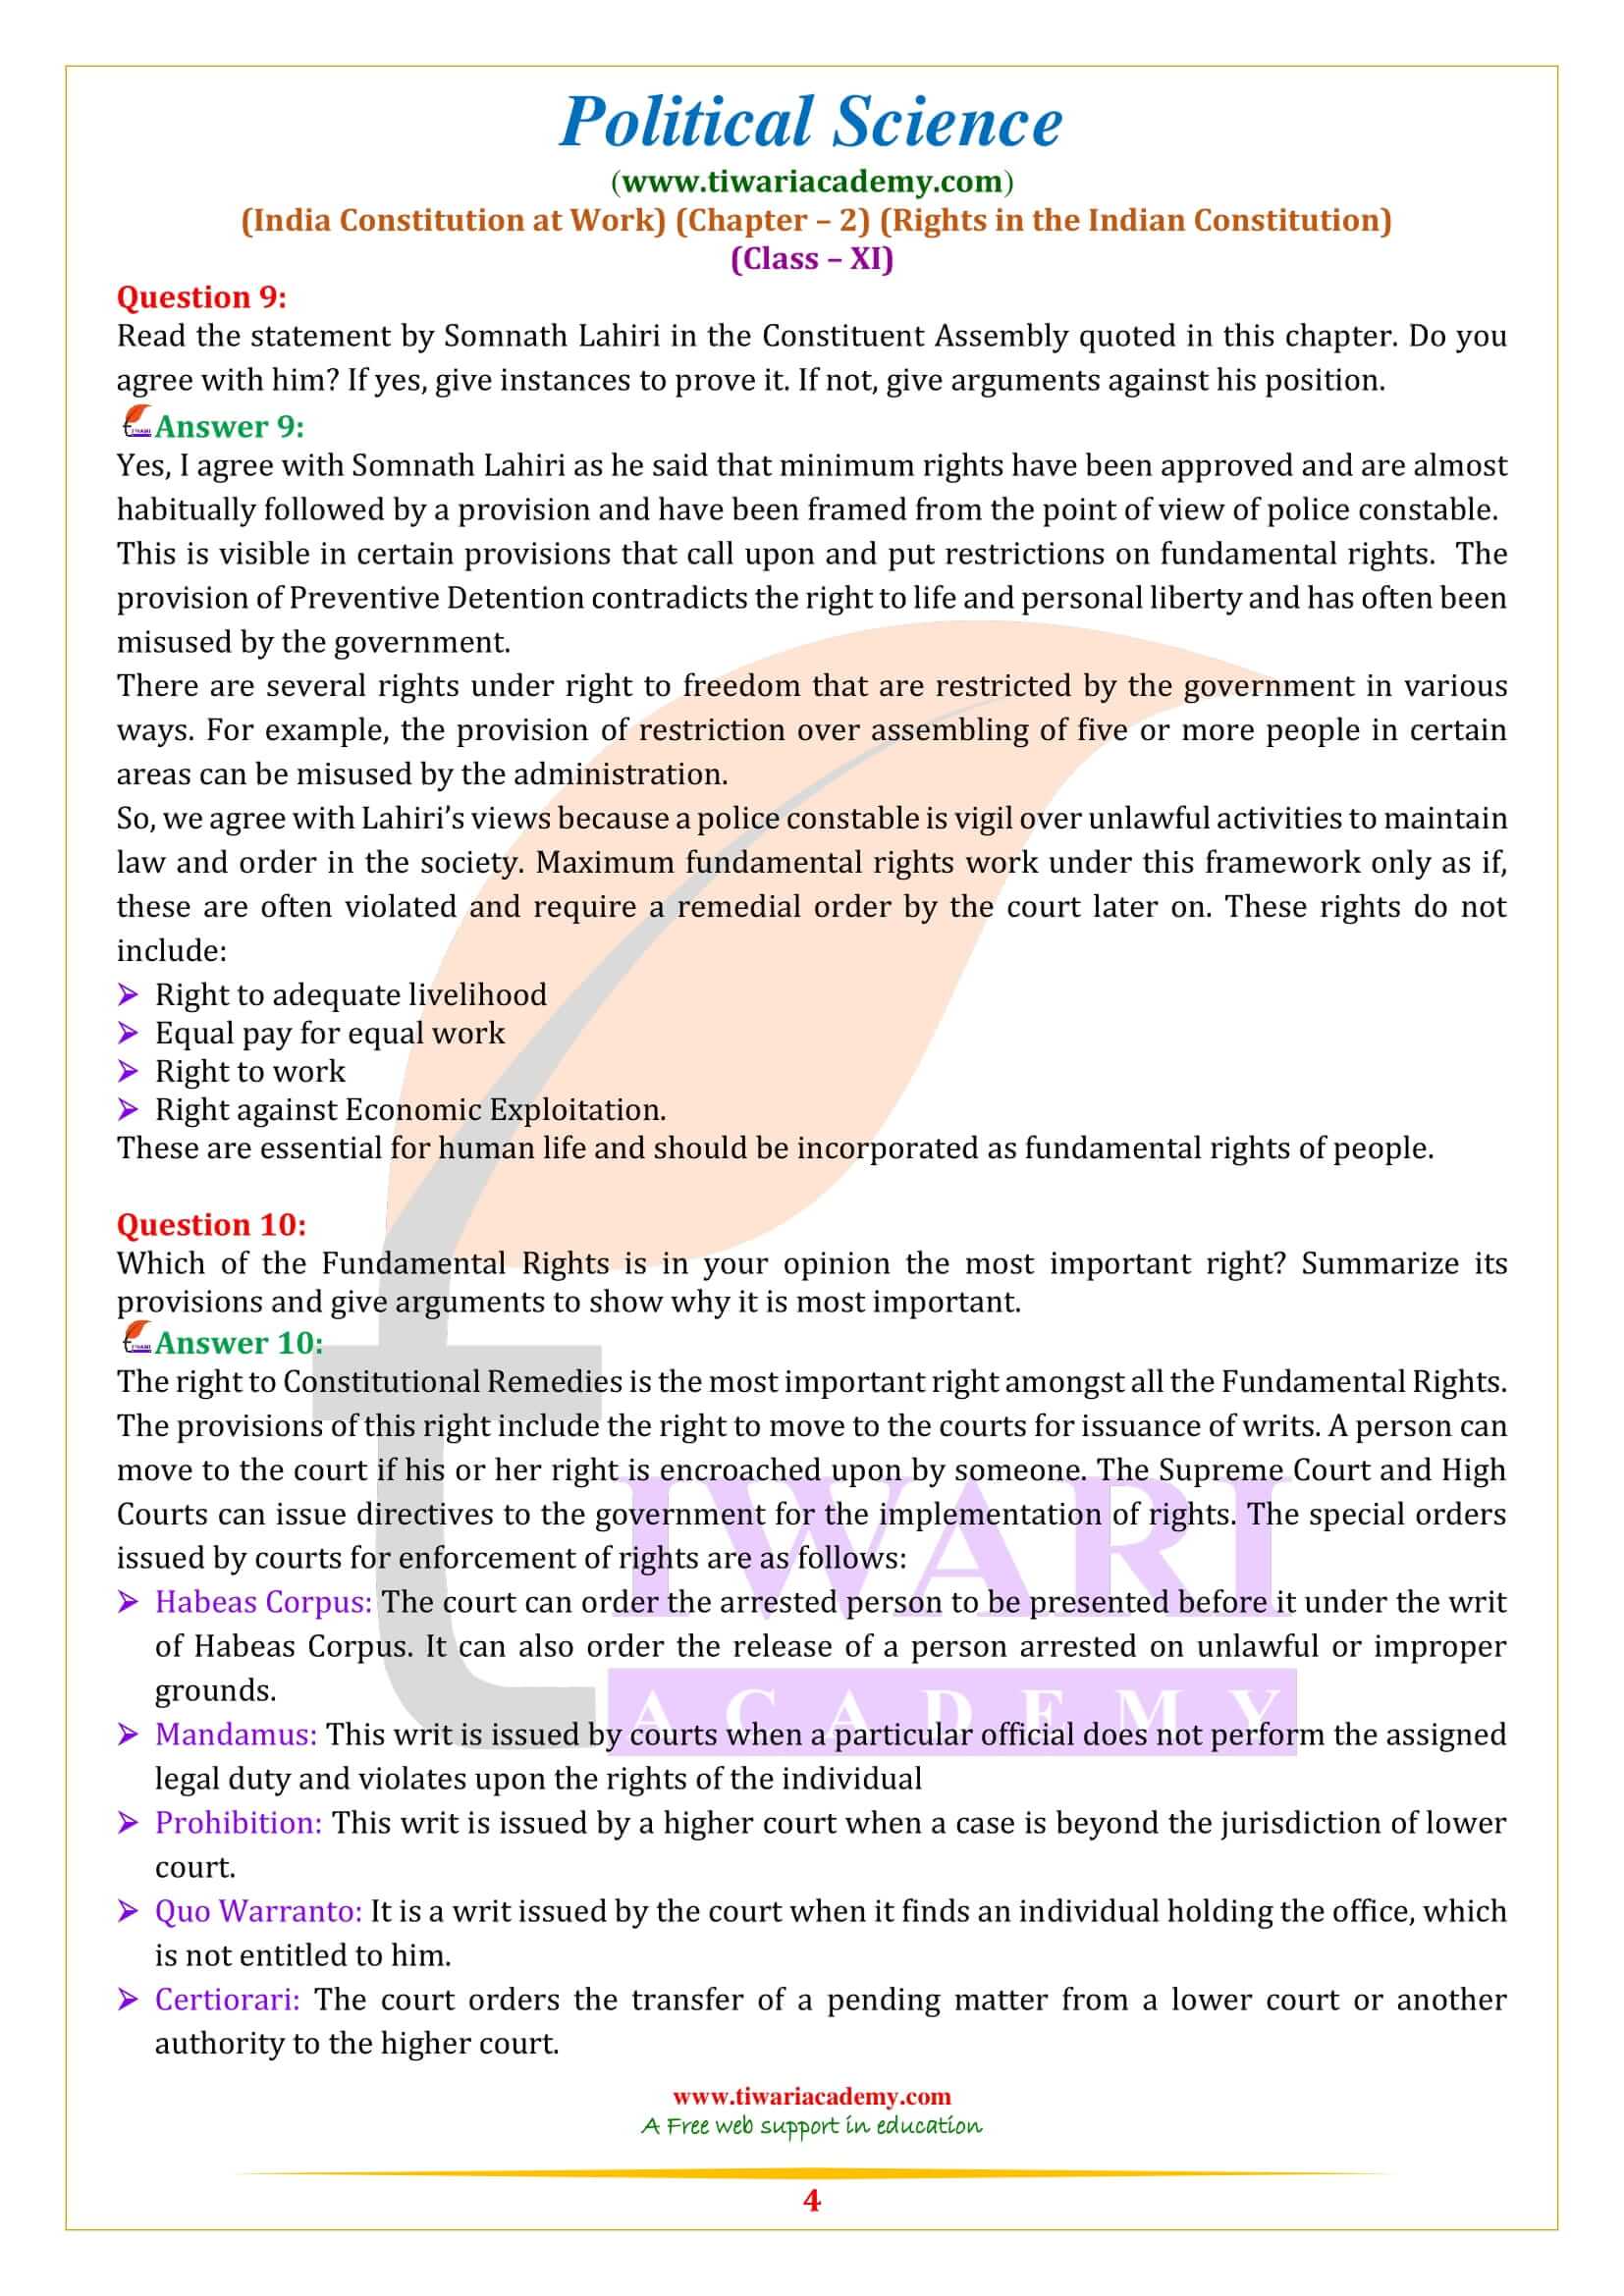 NCERT Solutions for Class 11 Political Science Chapter 2 in English Medium